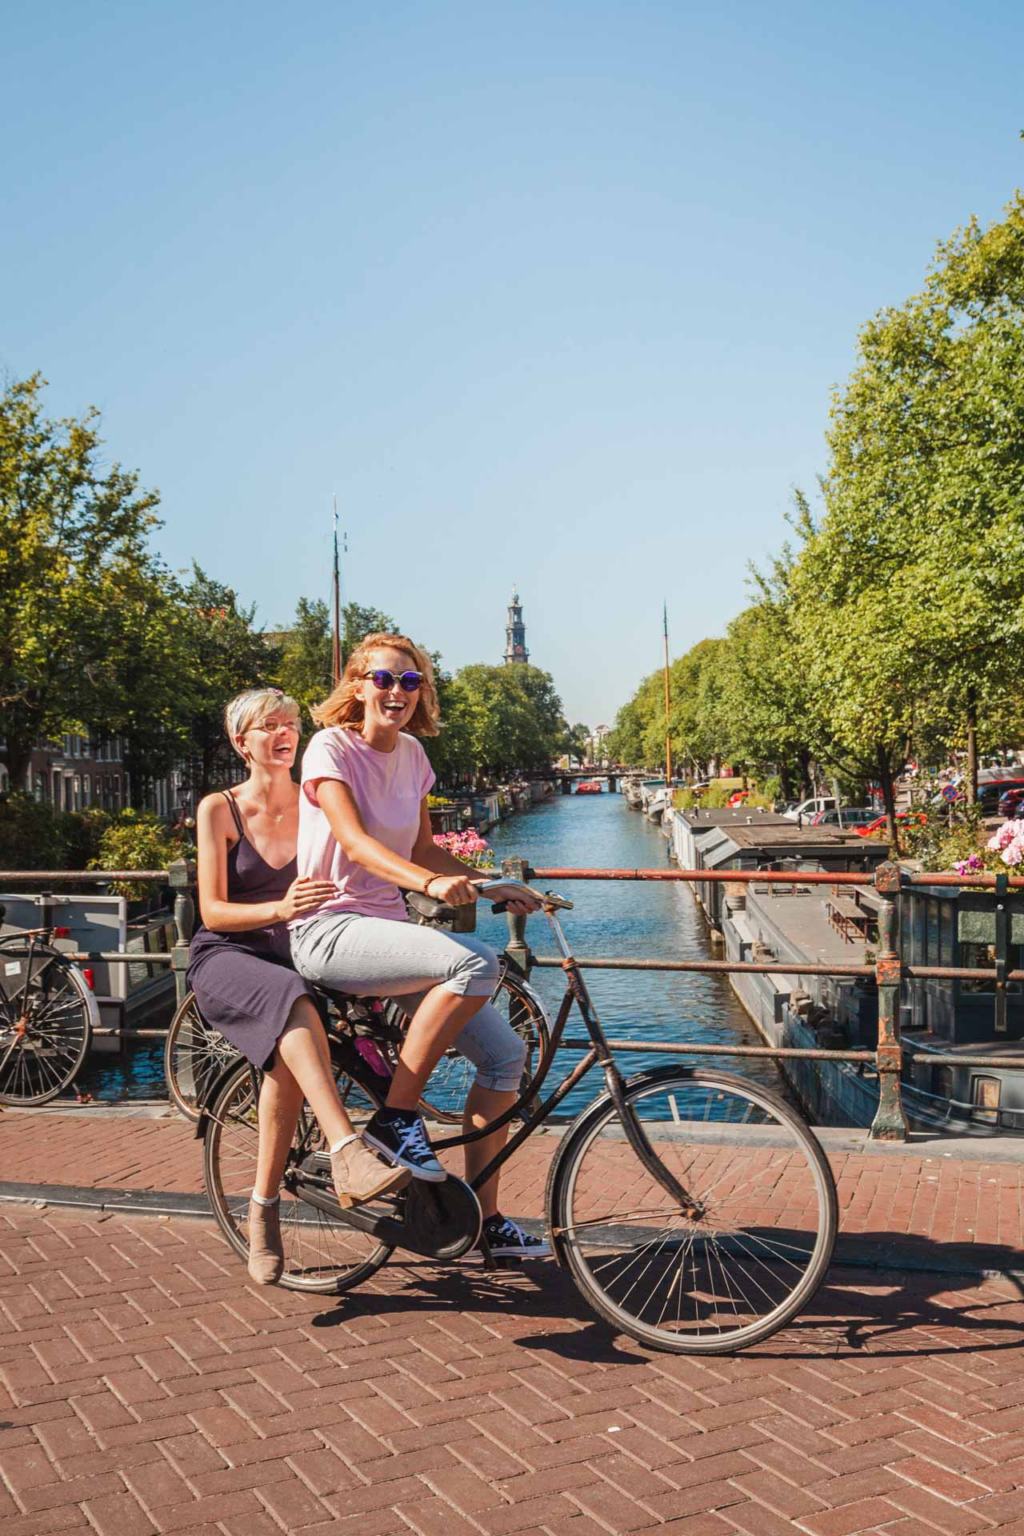 Lesbian couple on a bicycle in Amsterdam, Netherlands